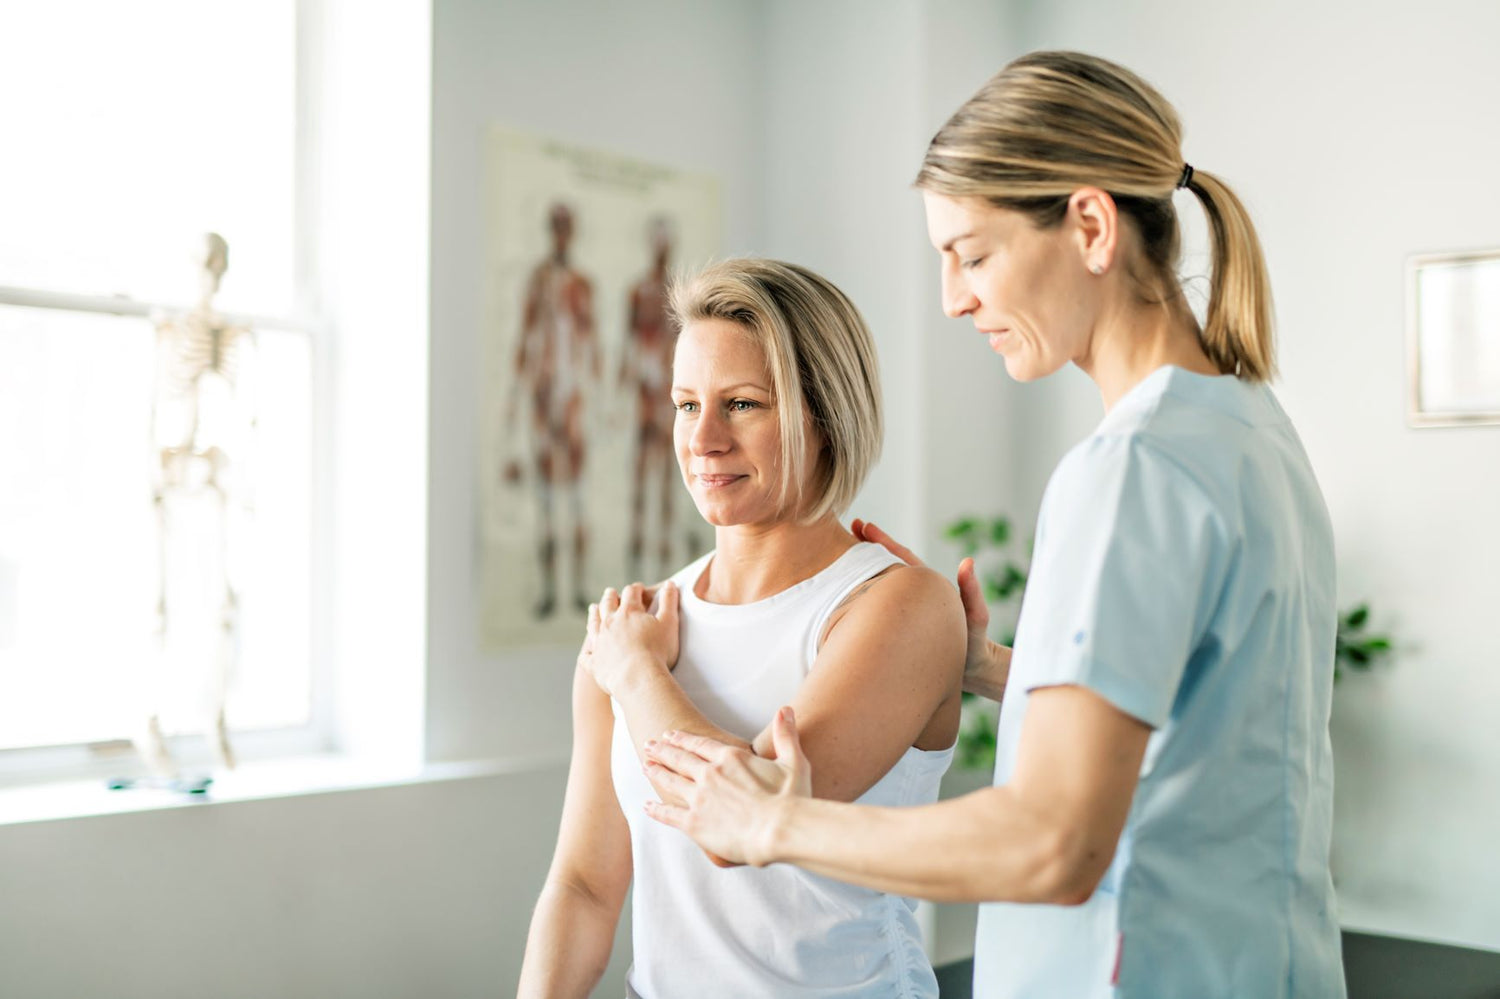 A Physiotherapy Career: What is it Like to Work as a Physiotherapist?